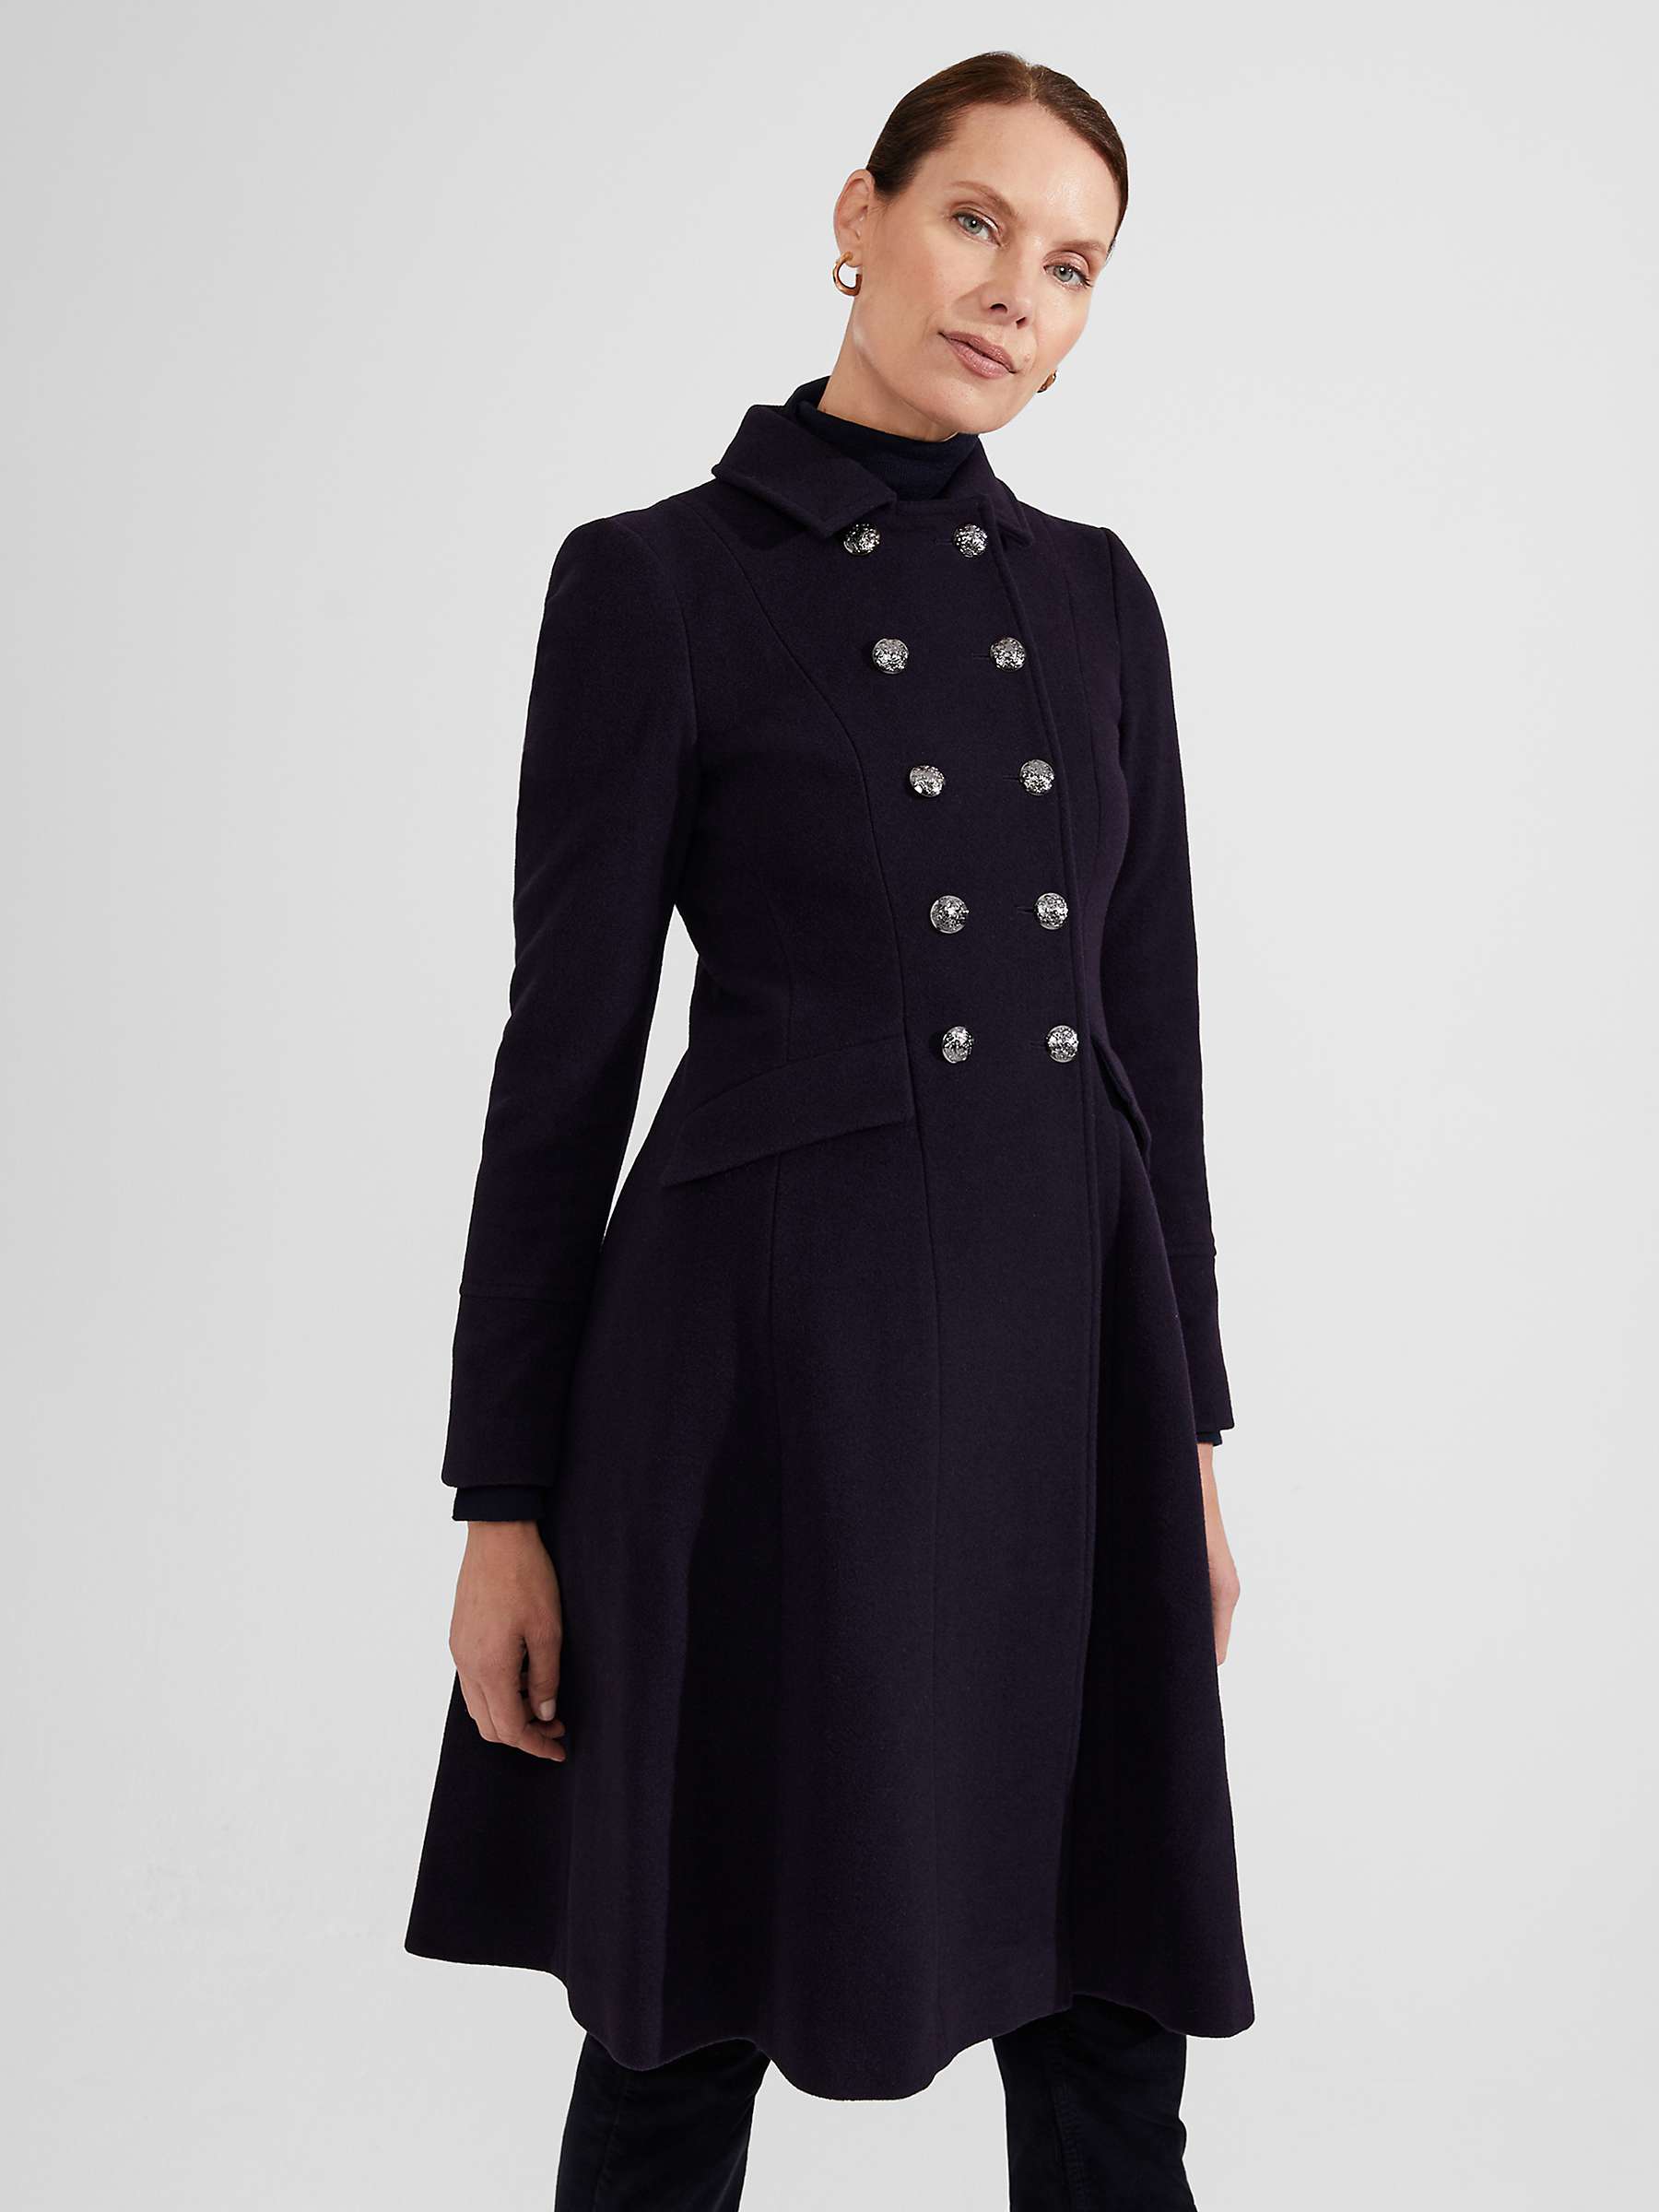 Buy Hobbs Clarisse Wool and Cashmere Blend Coat, Navy Online at johnlewis.com